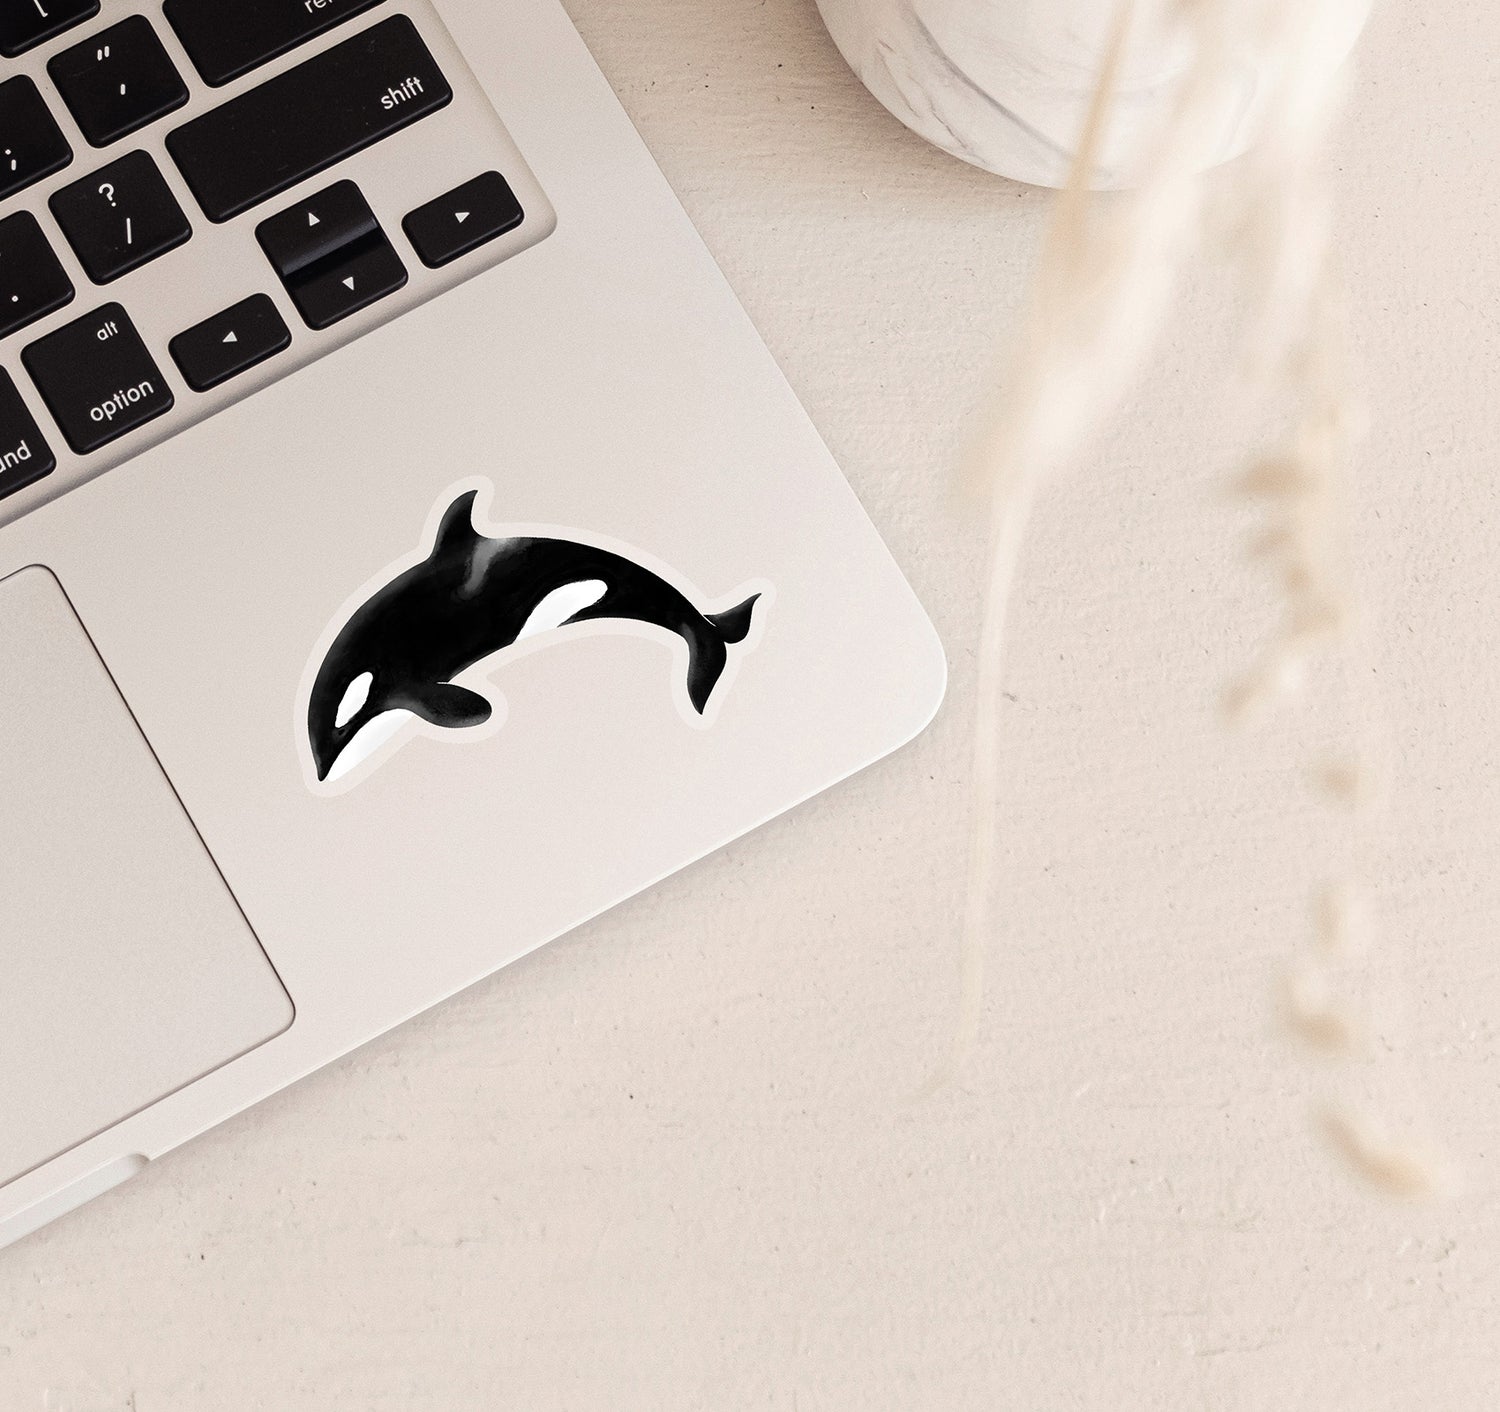 Clear vinyl ocean inspired laptop sticker of an orca whale, also known as a killer whale